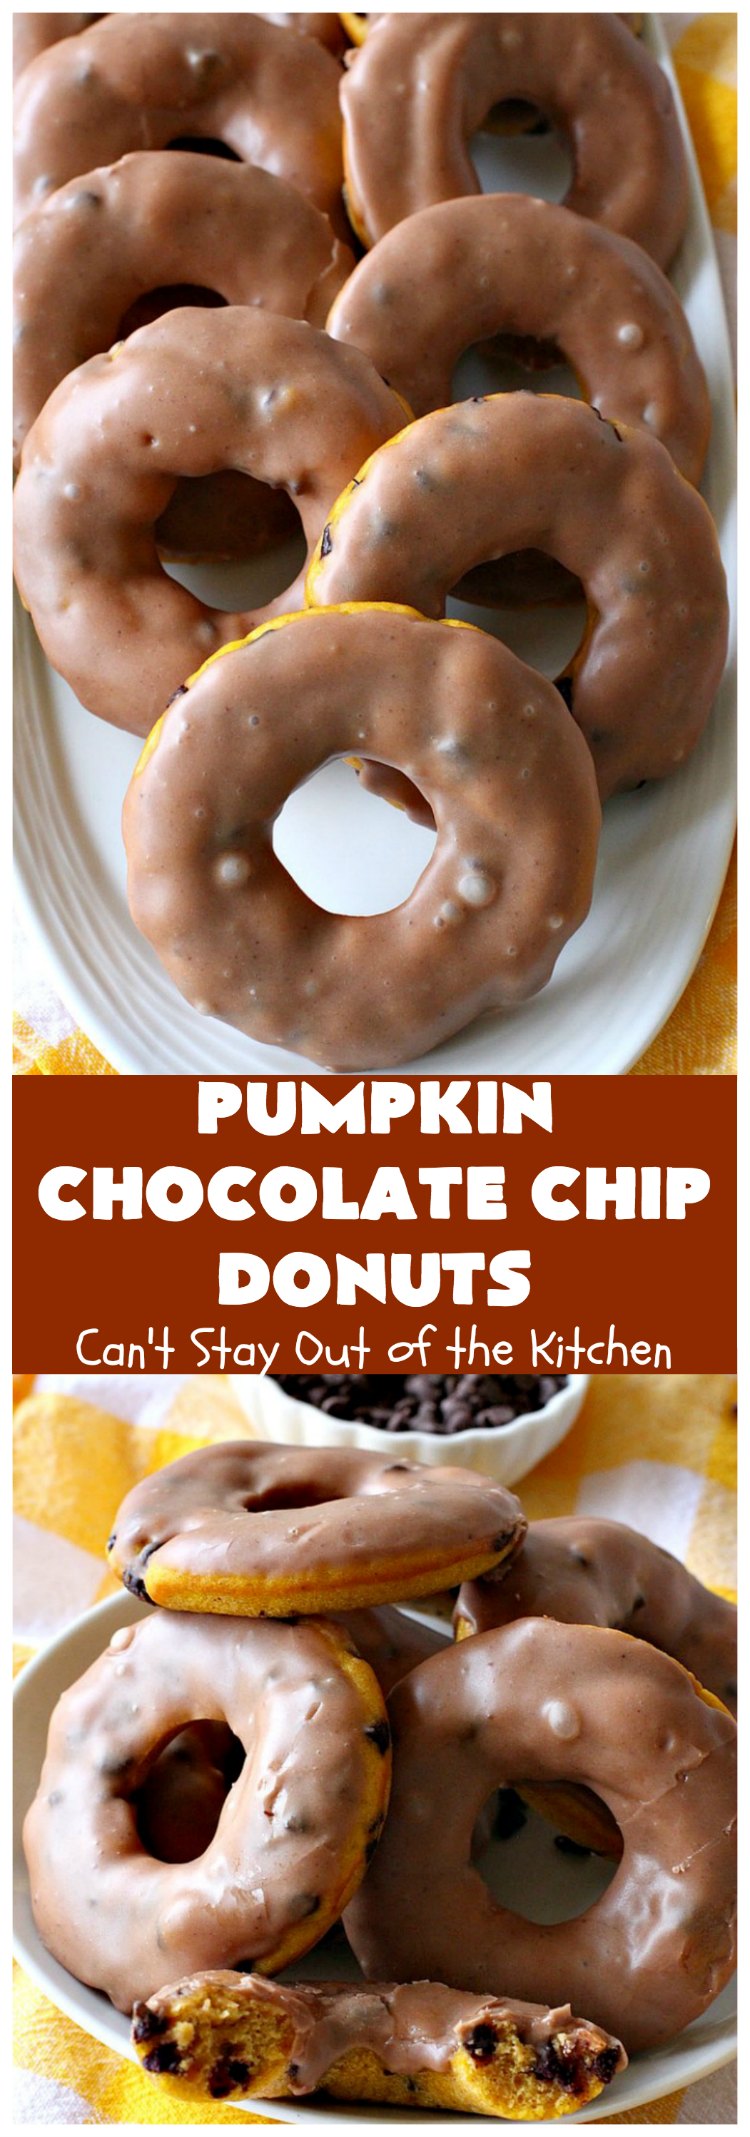 Pumpkin Chocolate Chip Donuts | Can't Stay Out of the Kitchen